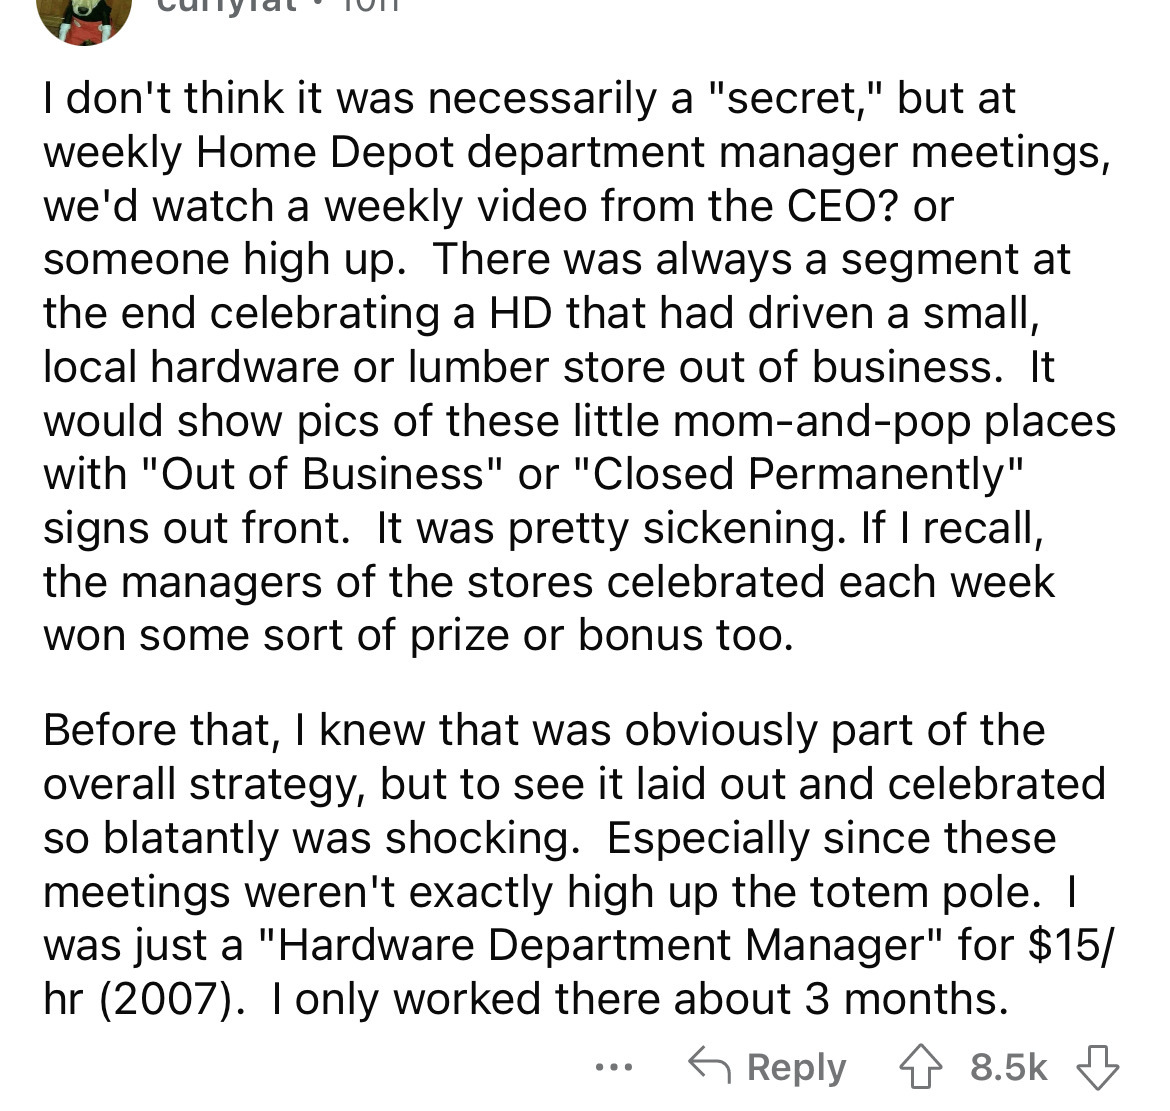 document - I don't think it was necessarily a "secret," but at weekly Home Depot department manager meetings, we'd watch a weekly video from the Ceo? or someone high up. There was always a segment at the end celebrating a Hd that had driven a small, local